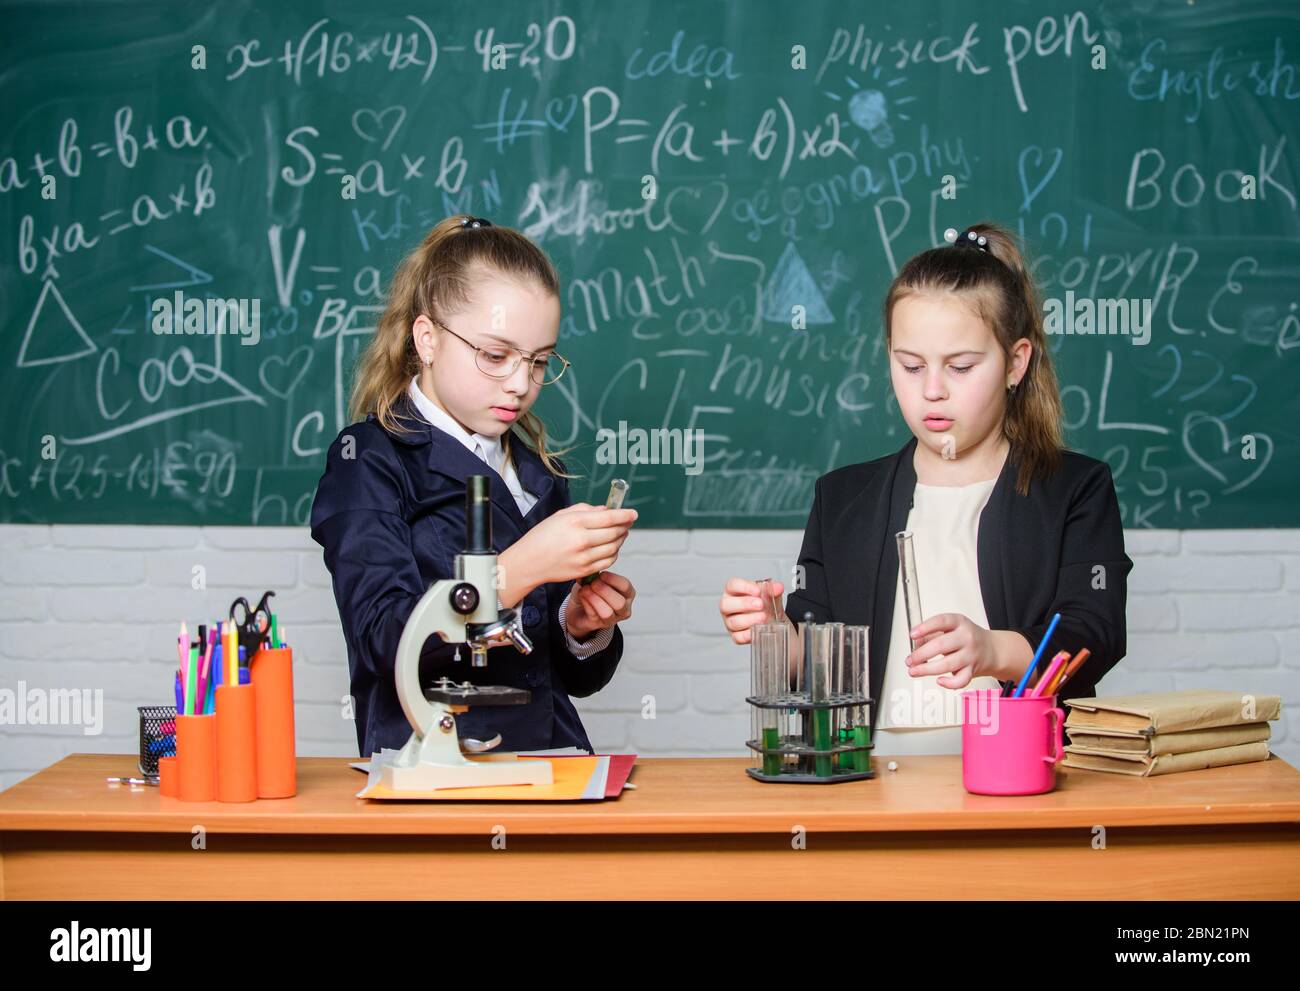 Scientific researches. Little scientist work with microscope. Little girls in school lab. Formal school education. Biology school lesson. Chemistry research. science experiments in laboratory. Stock Photo